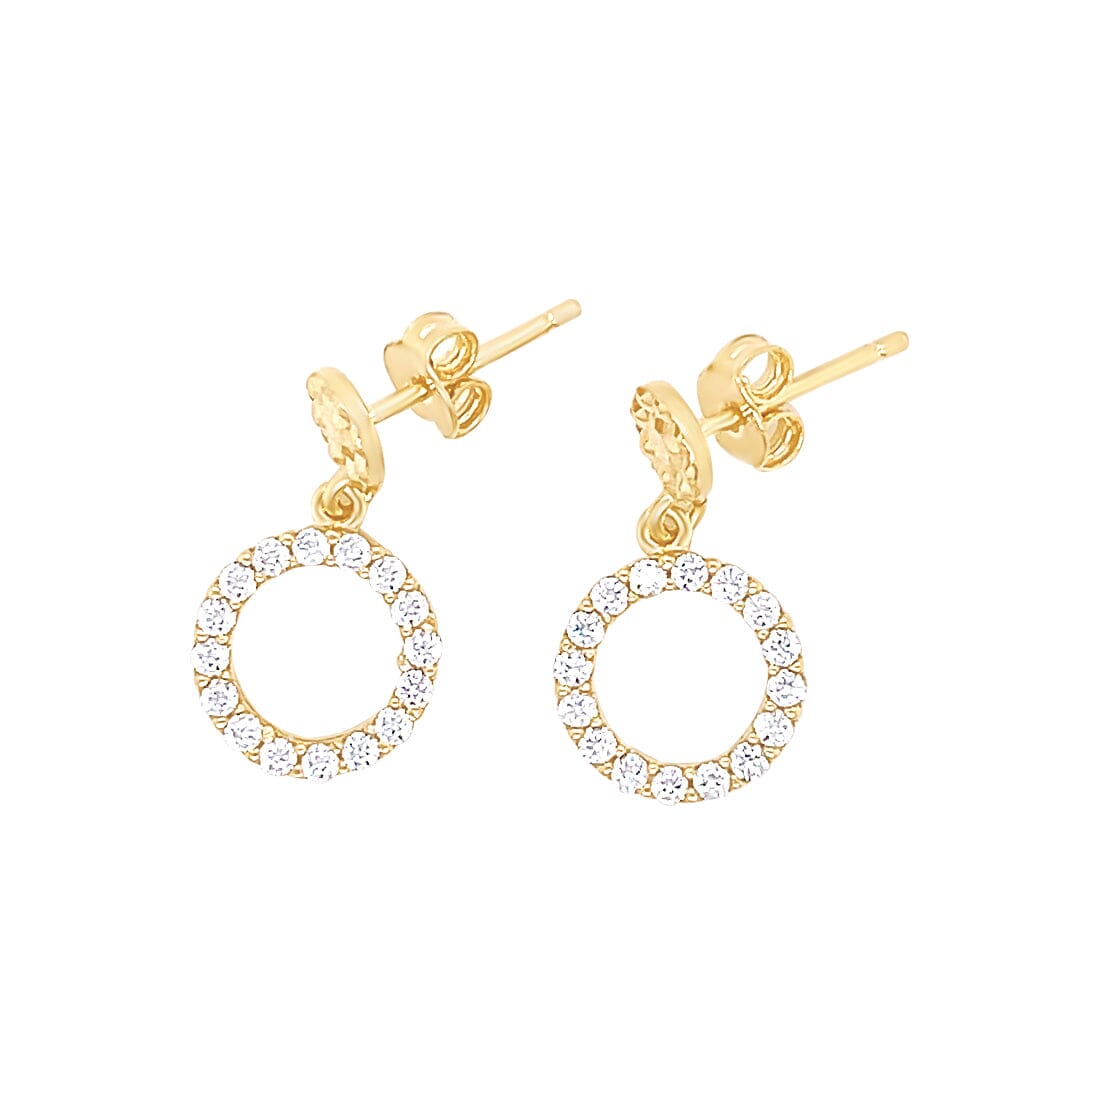 9ct Yellow Gold Silver Infused Round Hoop Earrings with Cubic Zirconia Earrings Bevilles 